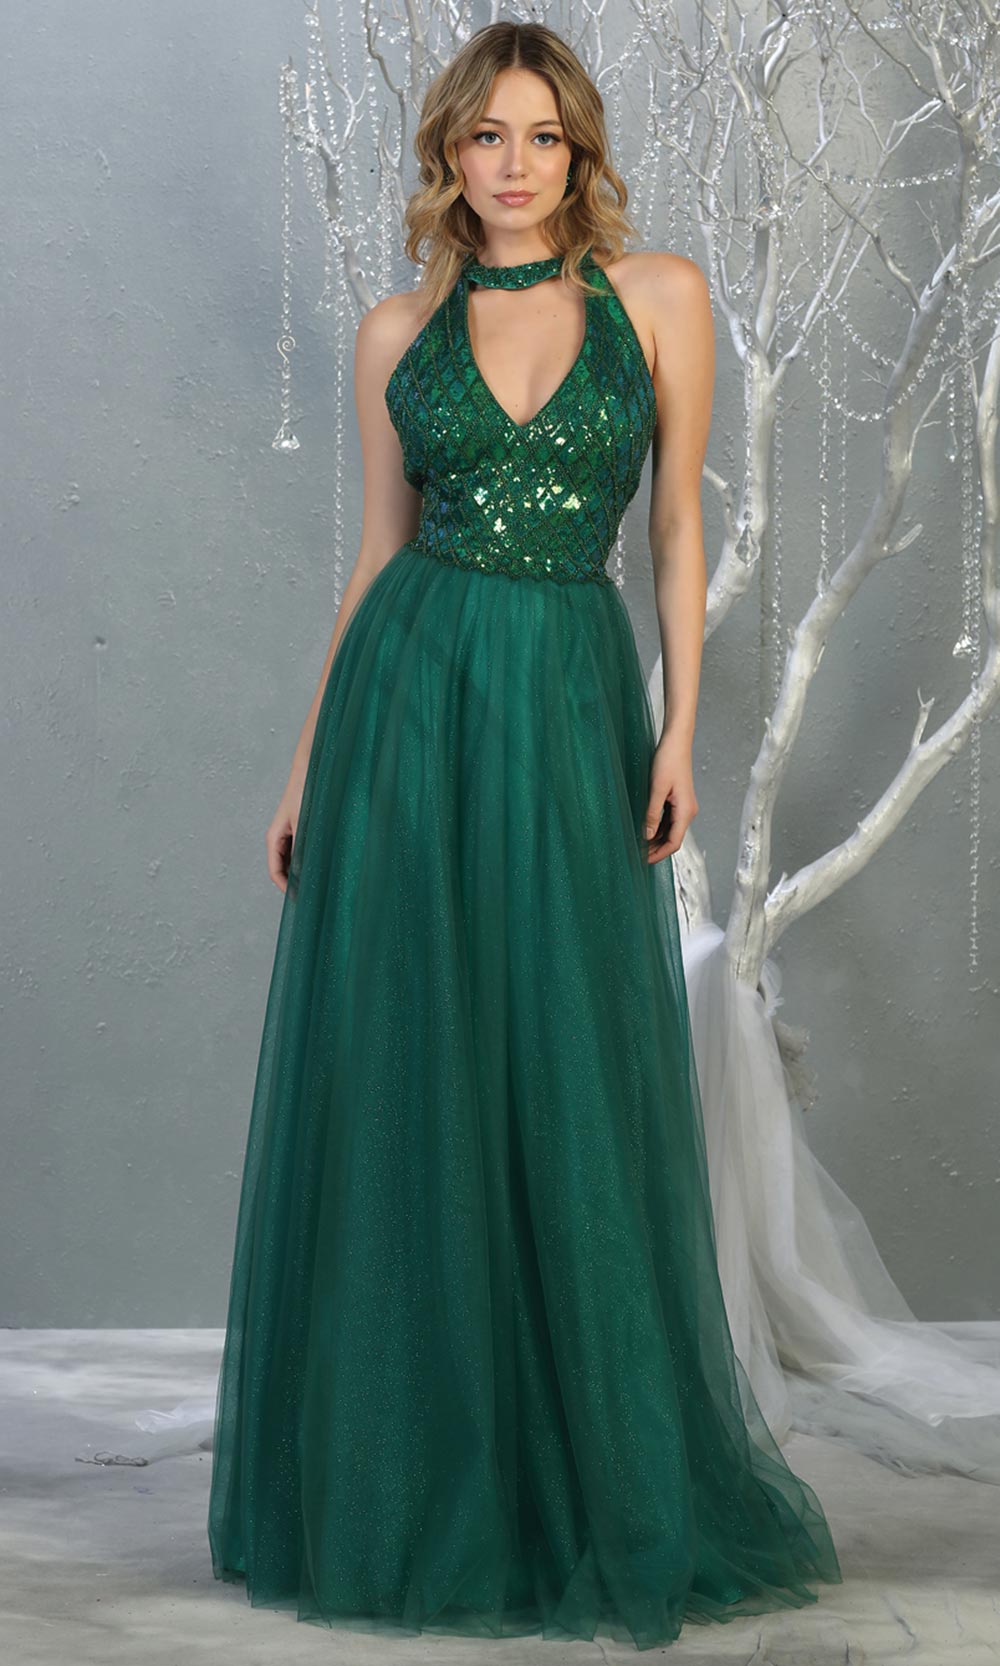 Mayqueen RQ7863 long hunter green v neck sequin top evening gown. Full length flowy green gown w/ tulle skirt is perfect for  enagagement/e-shoot dress, formal wedding guest, evening party dress, prom, engagement, wedding reception. Plus sizes avail.jpg